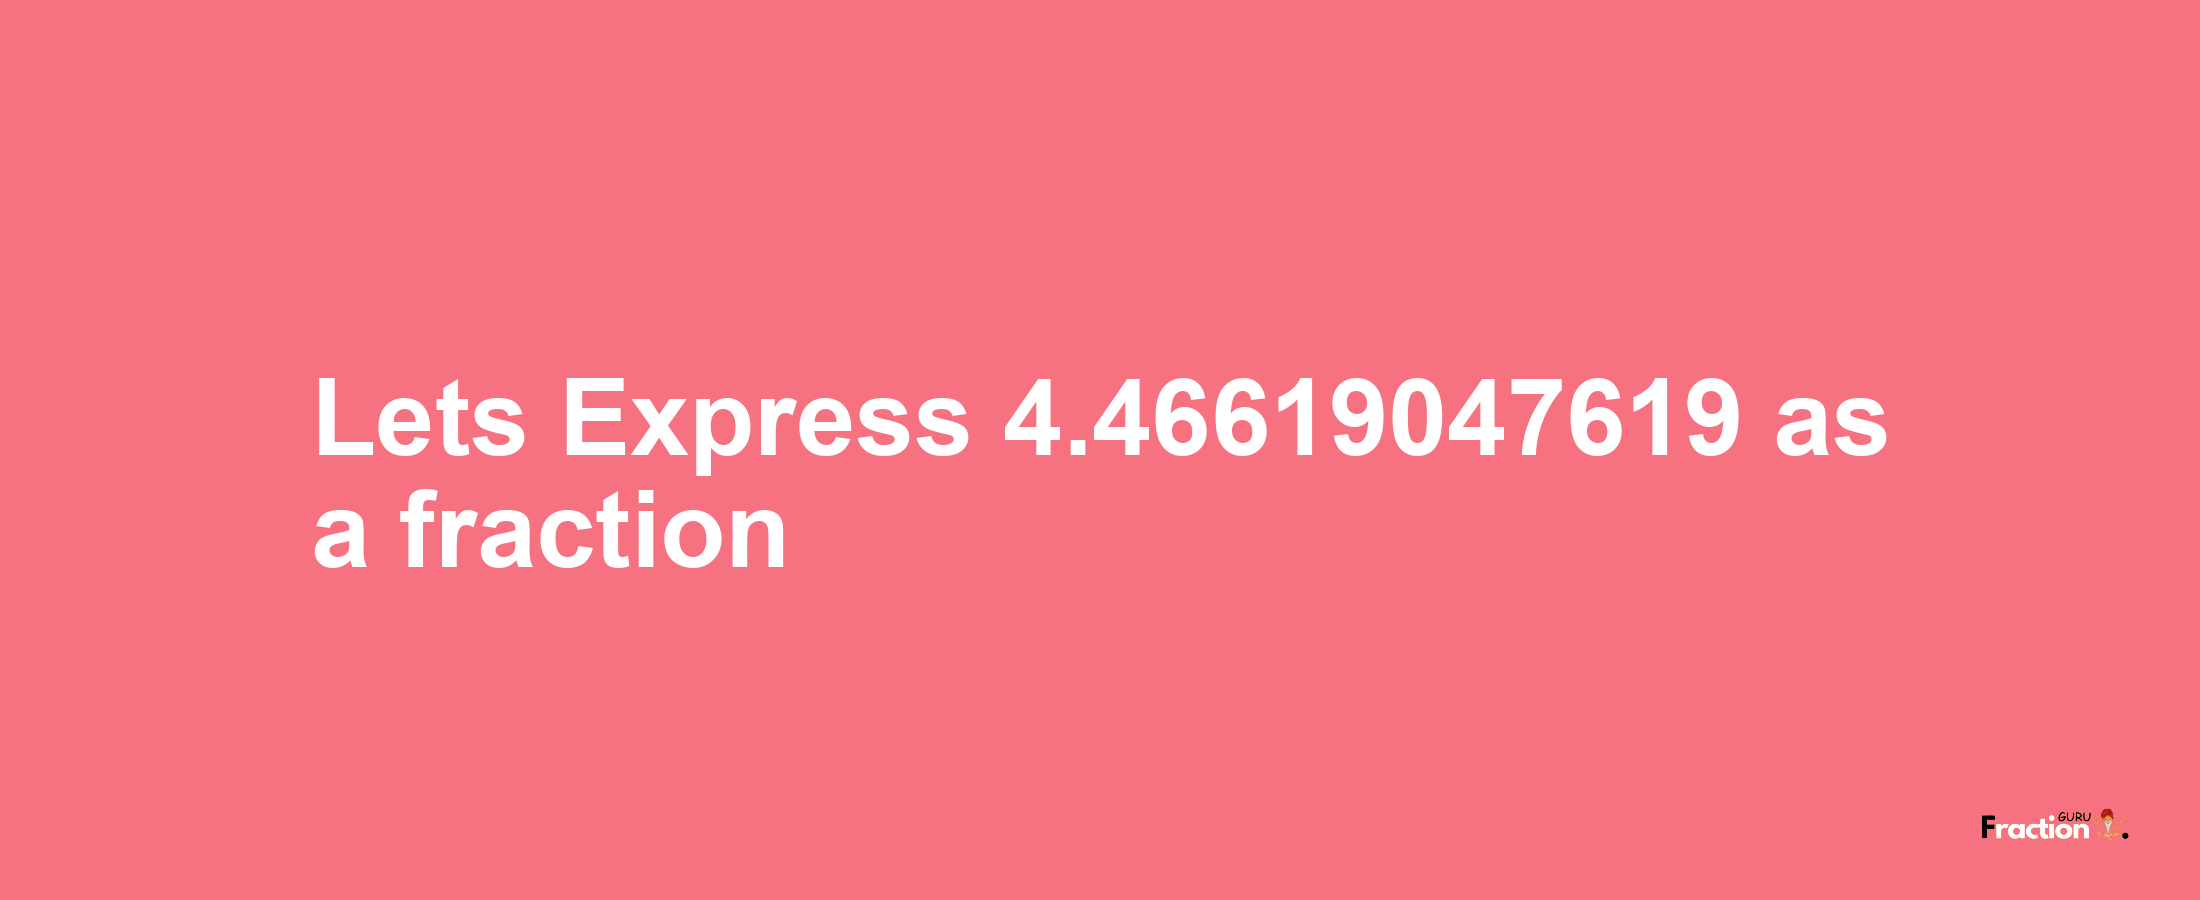 Lets Express 4.46619047619 as afraction